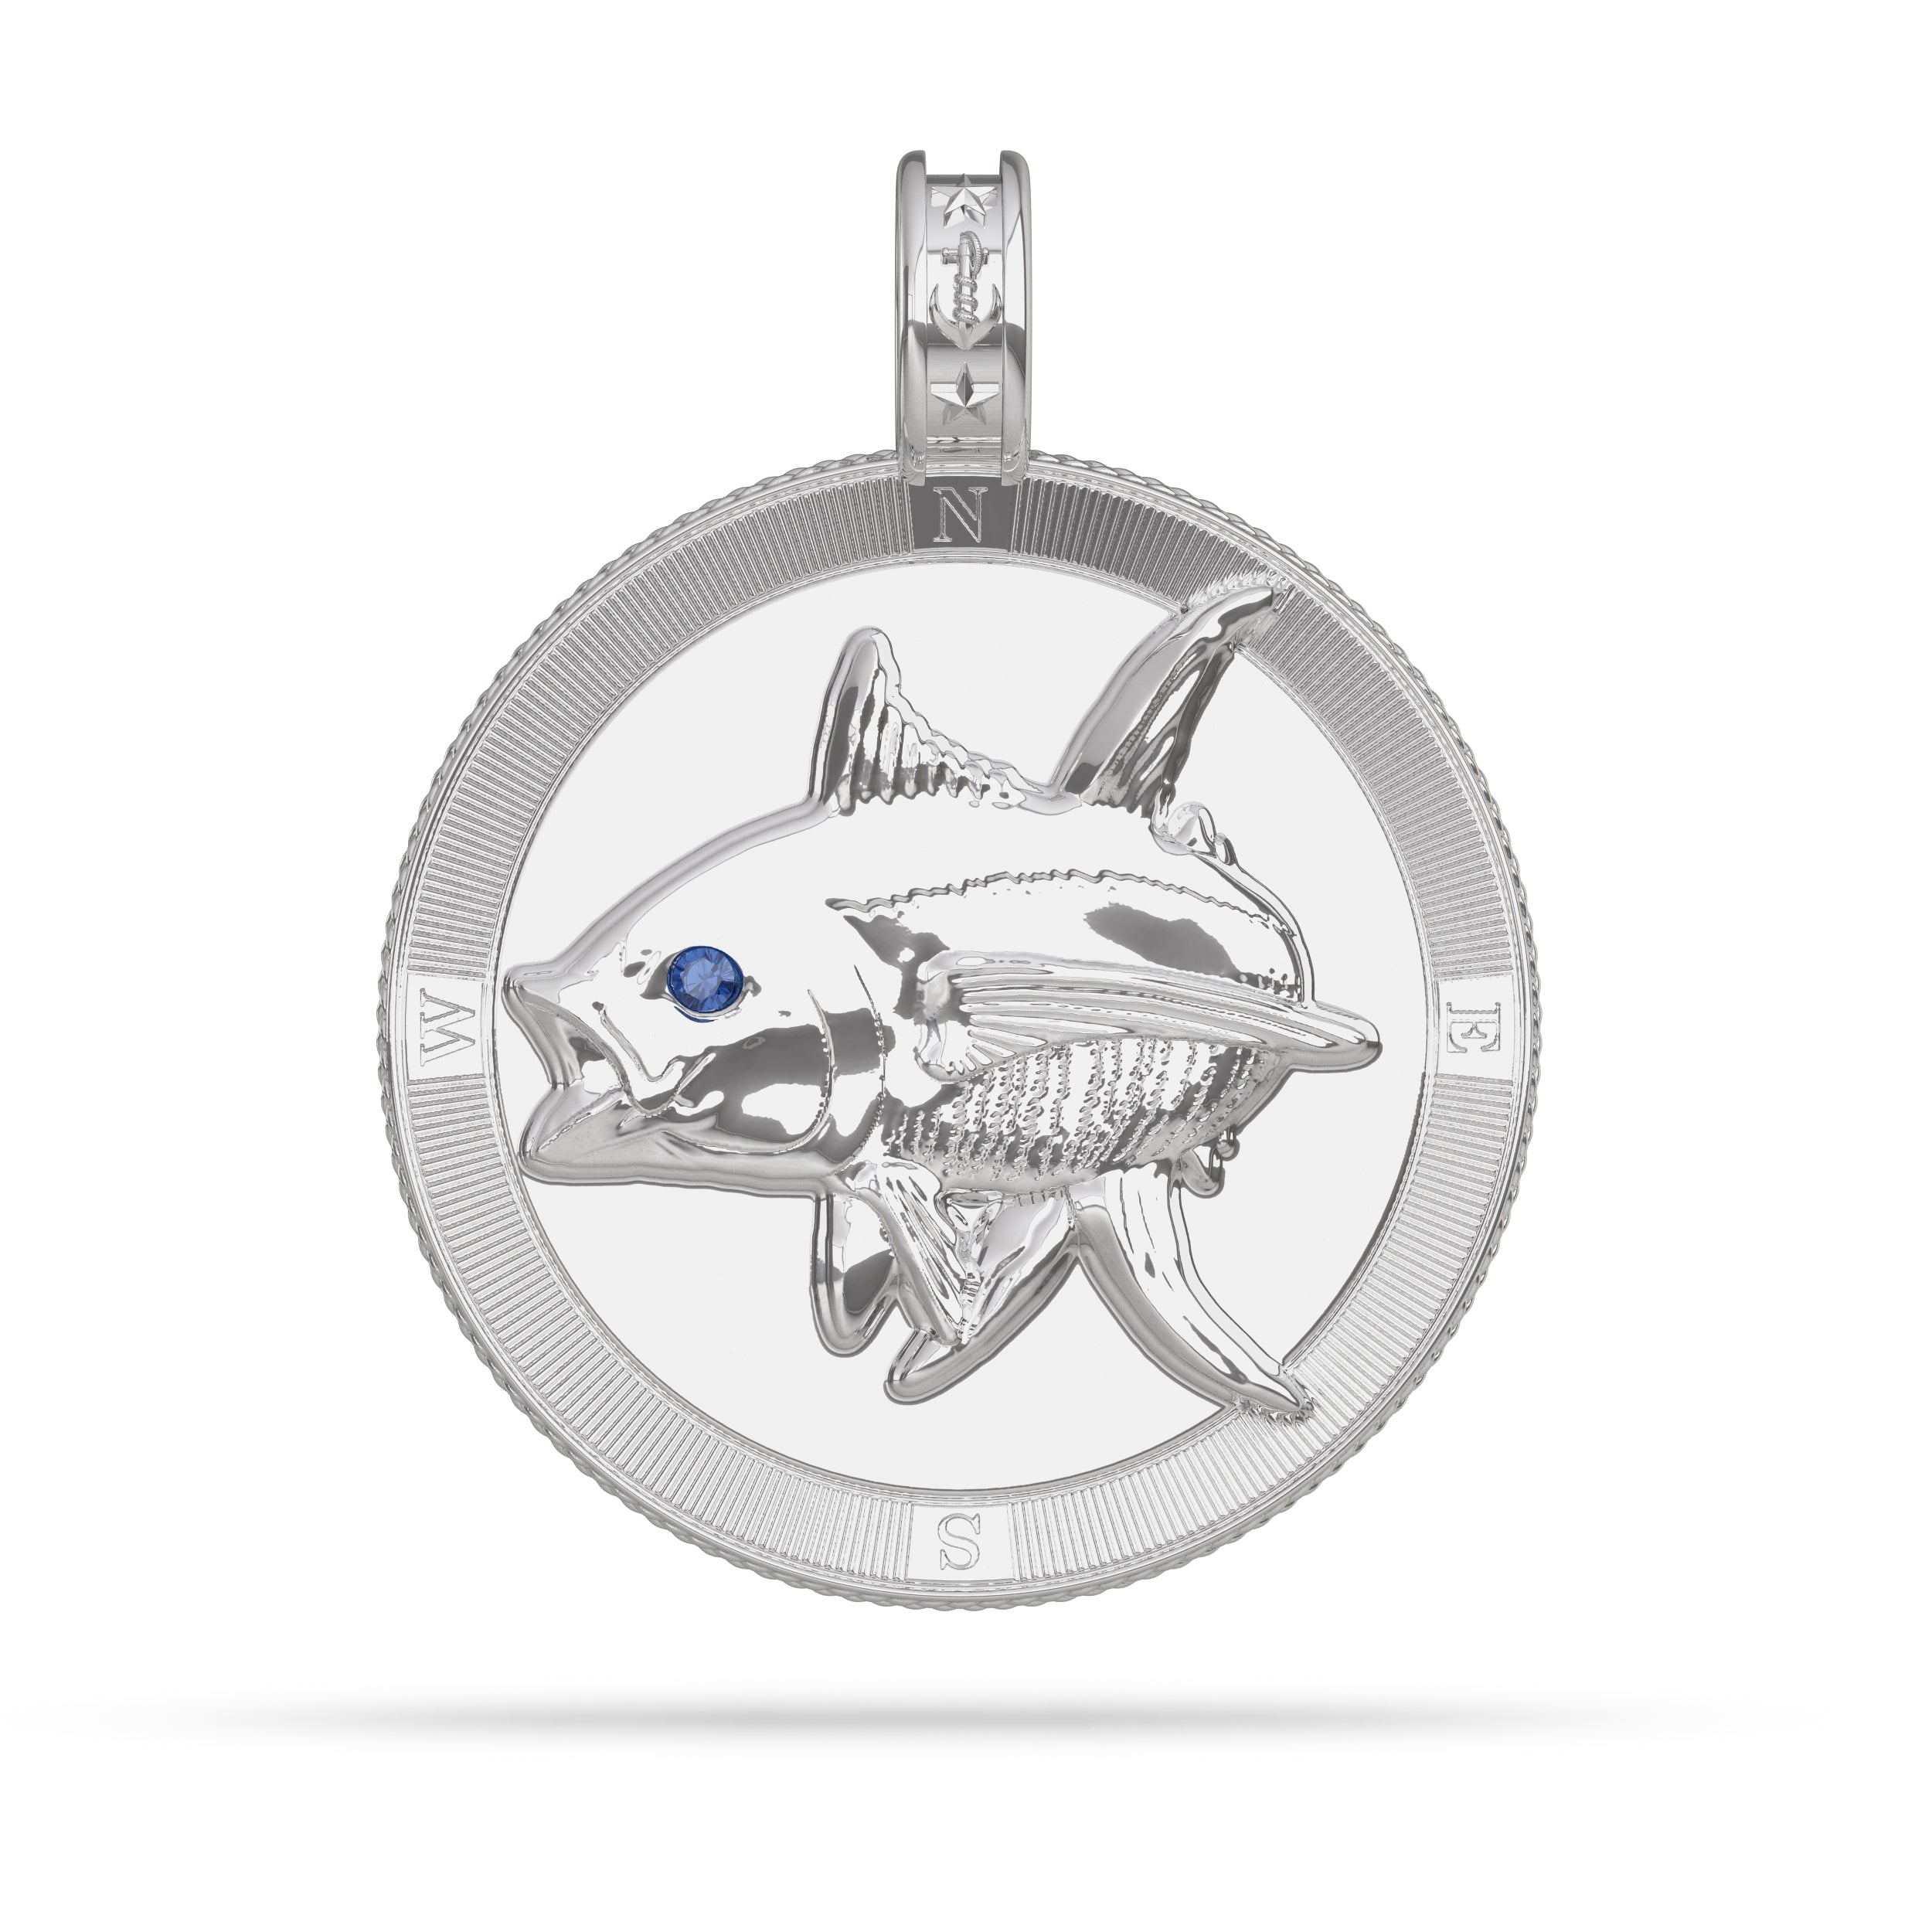 Yellowfin Tuna  Compass Medallion Pendant Large in Silver with Sapphire by Nautical Treasure